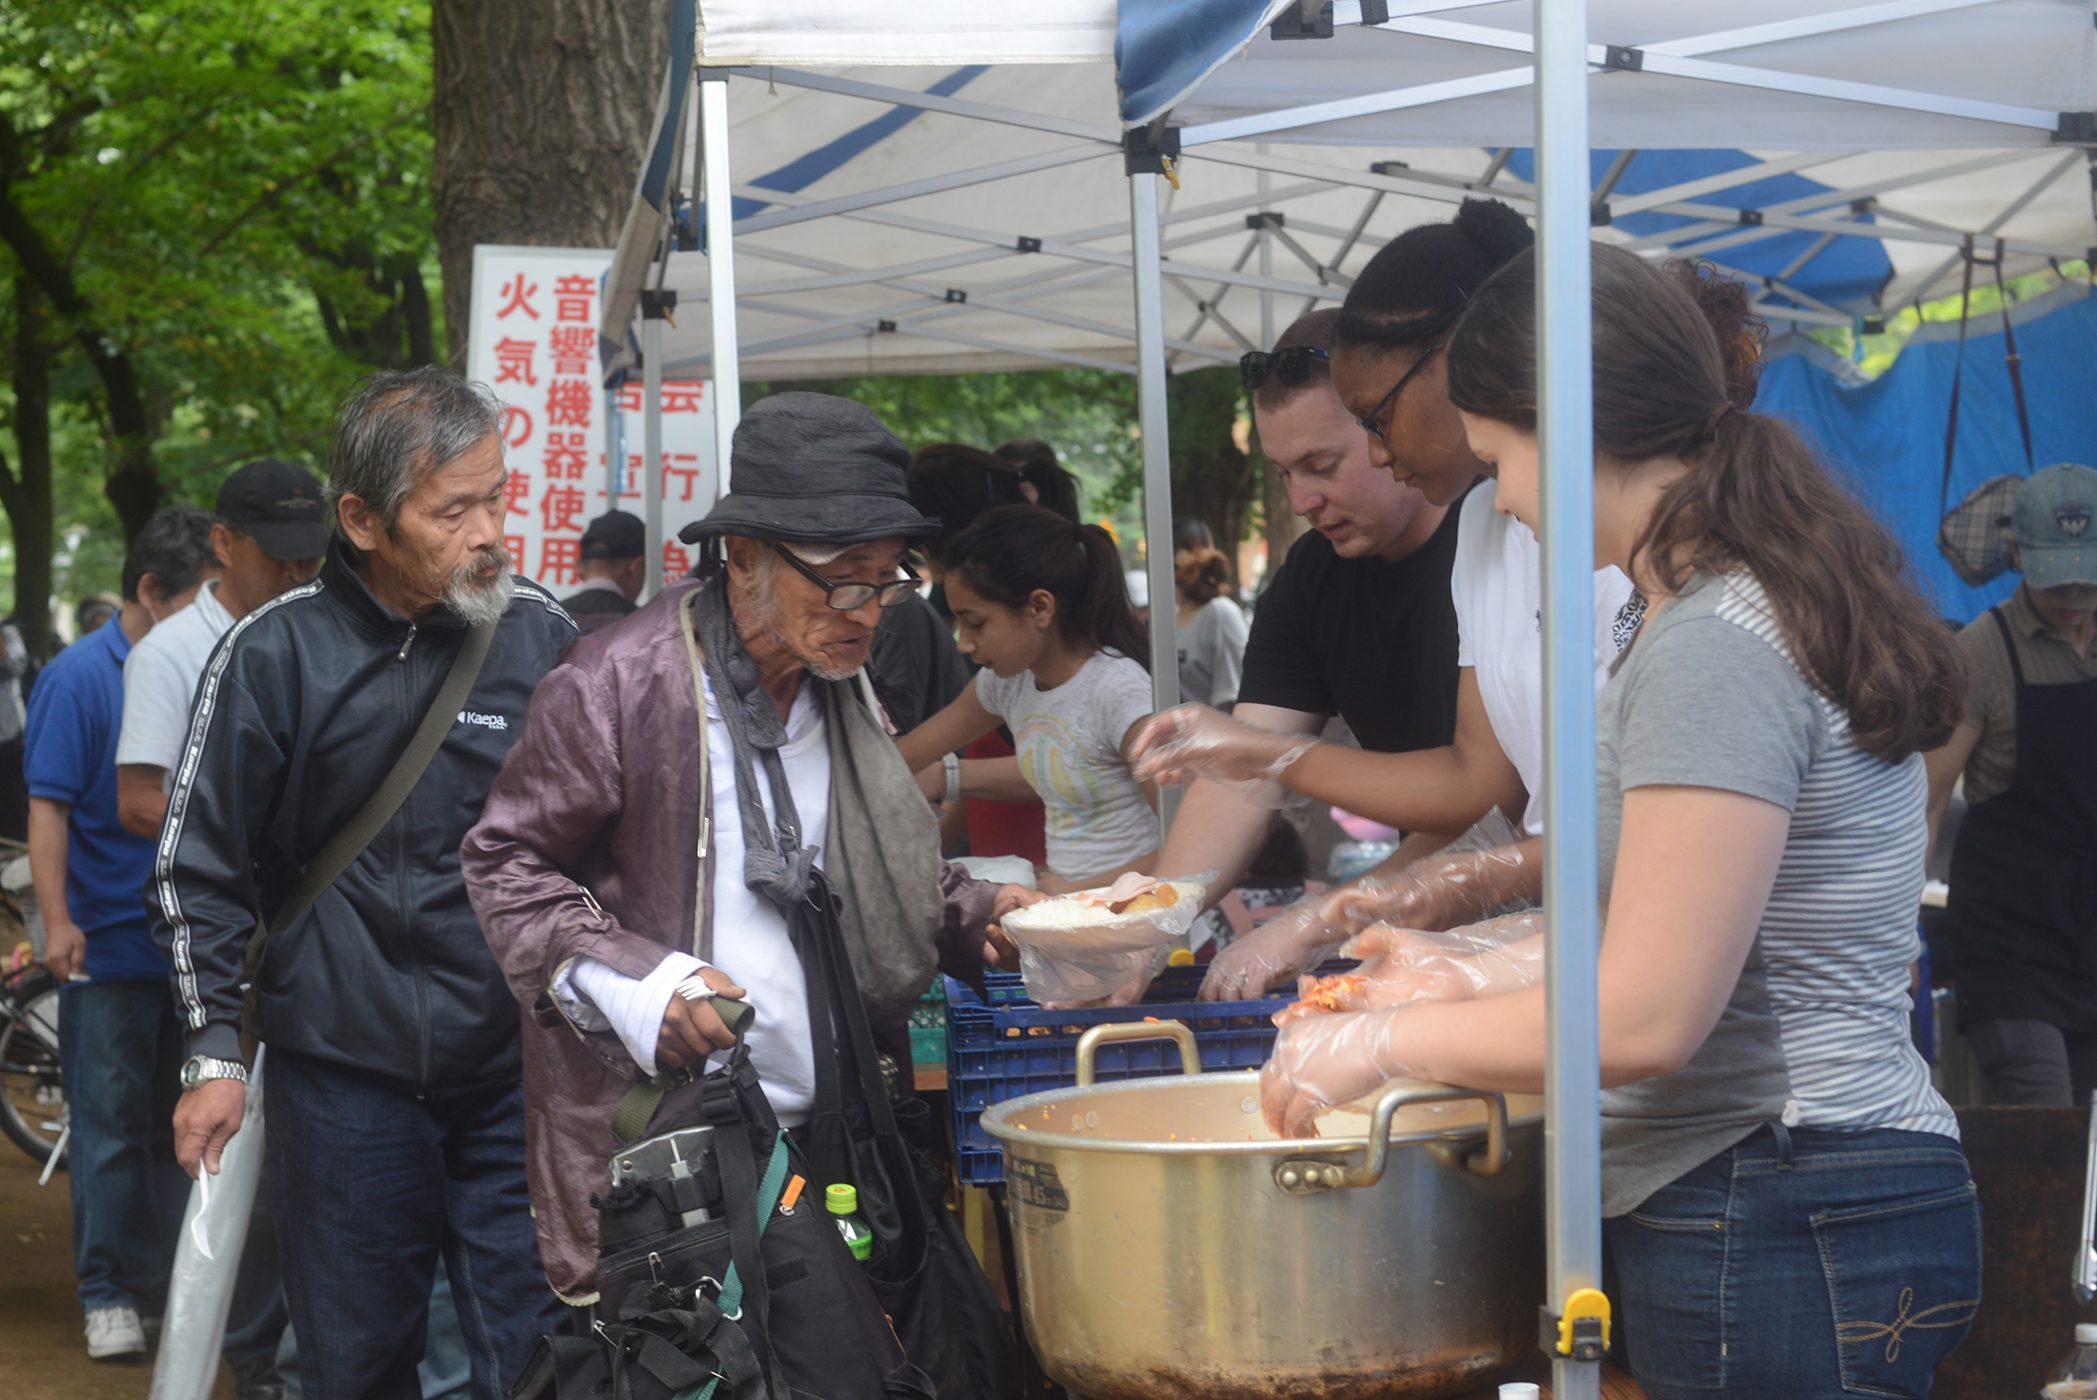 Volunteers serve meals to poor and homeless people in a public park.